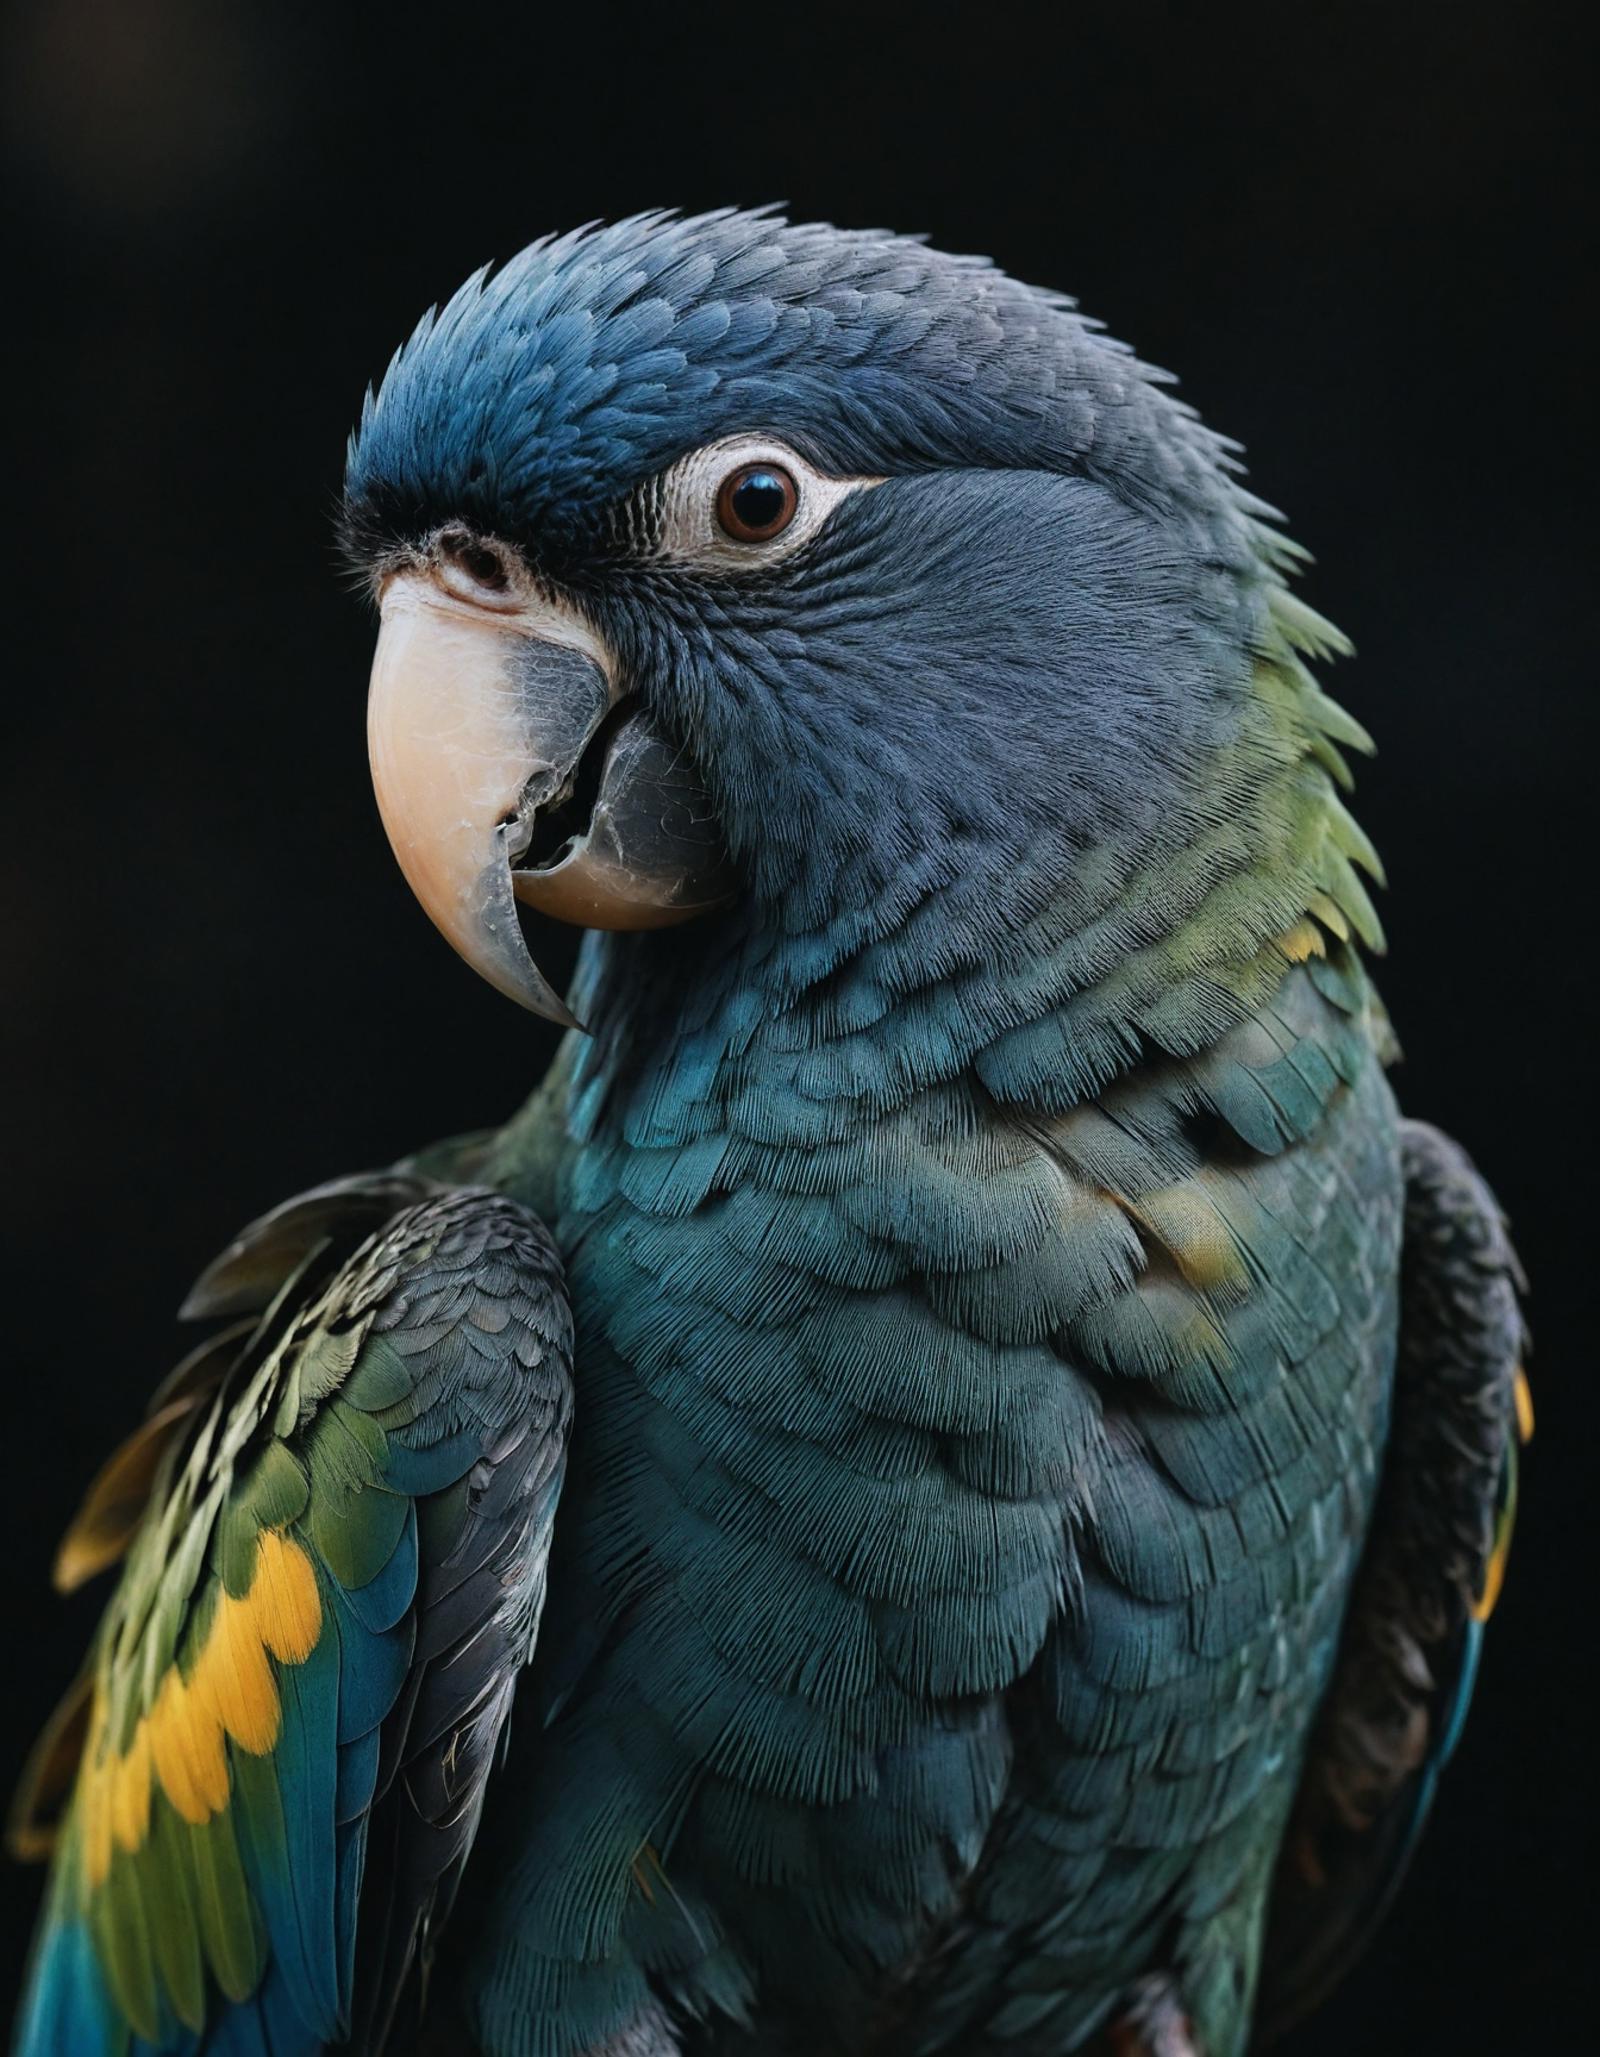 Blue Parrot with Black Beak and Yellow Spot on Wing.